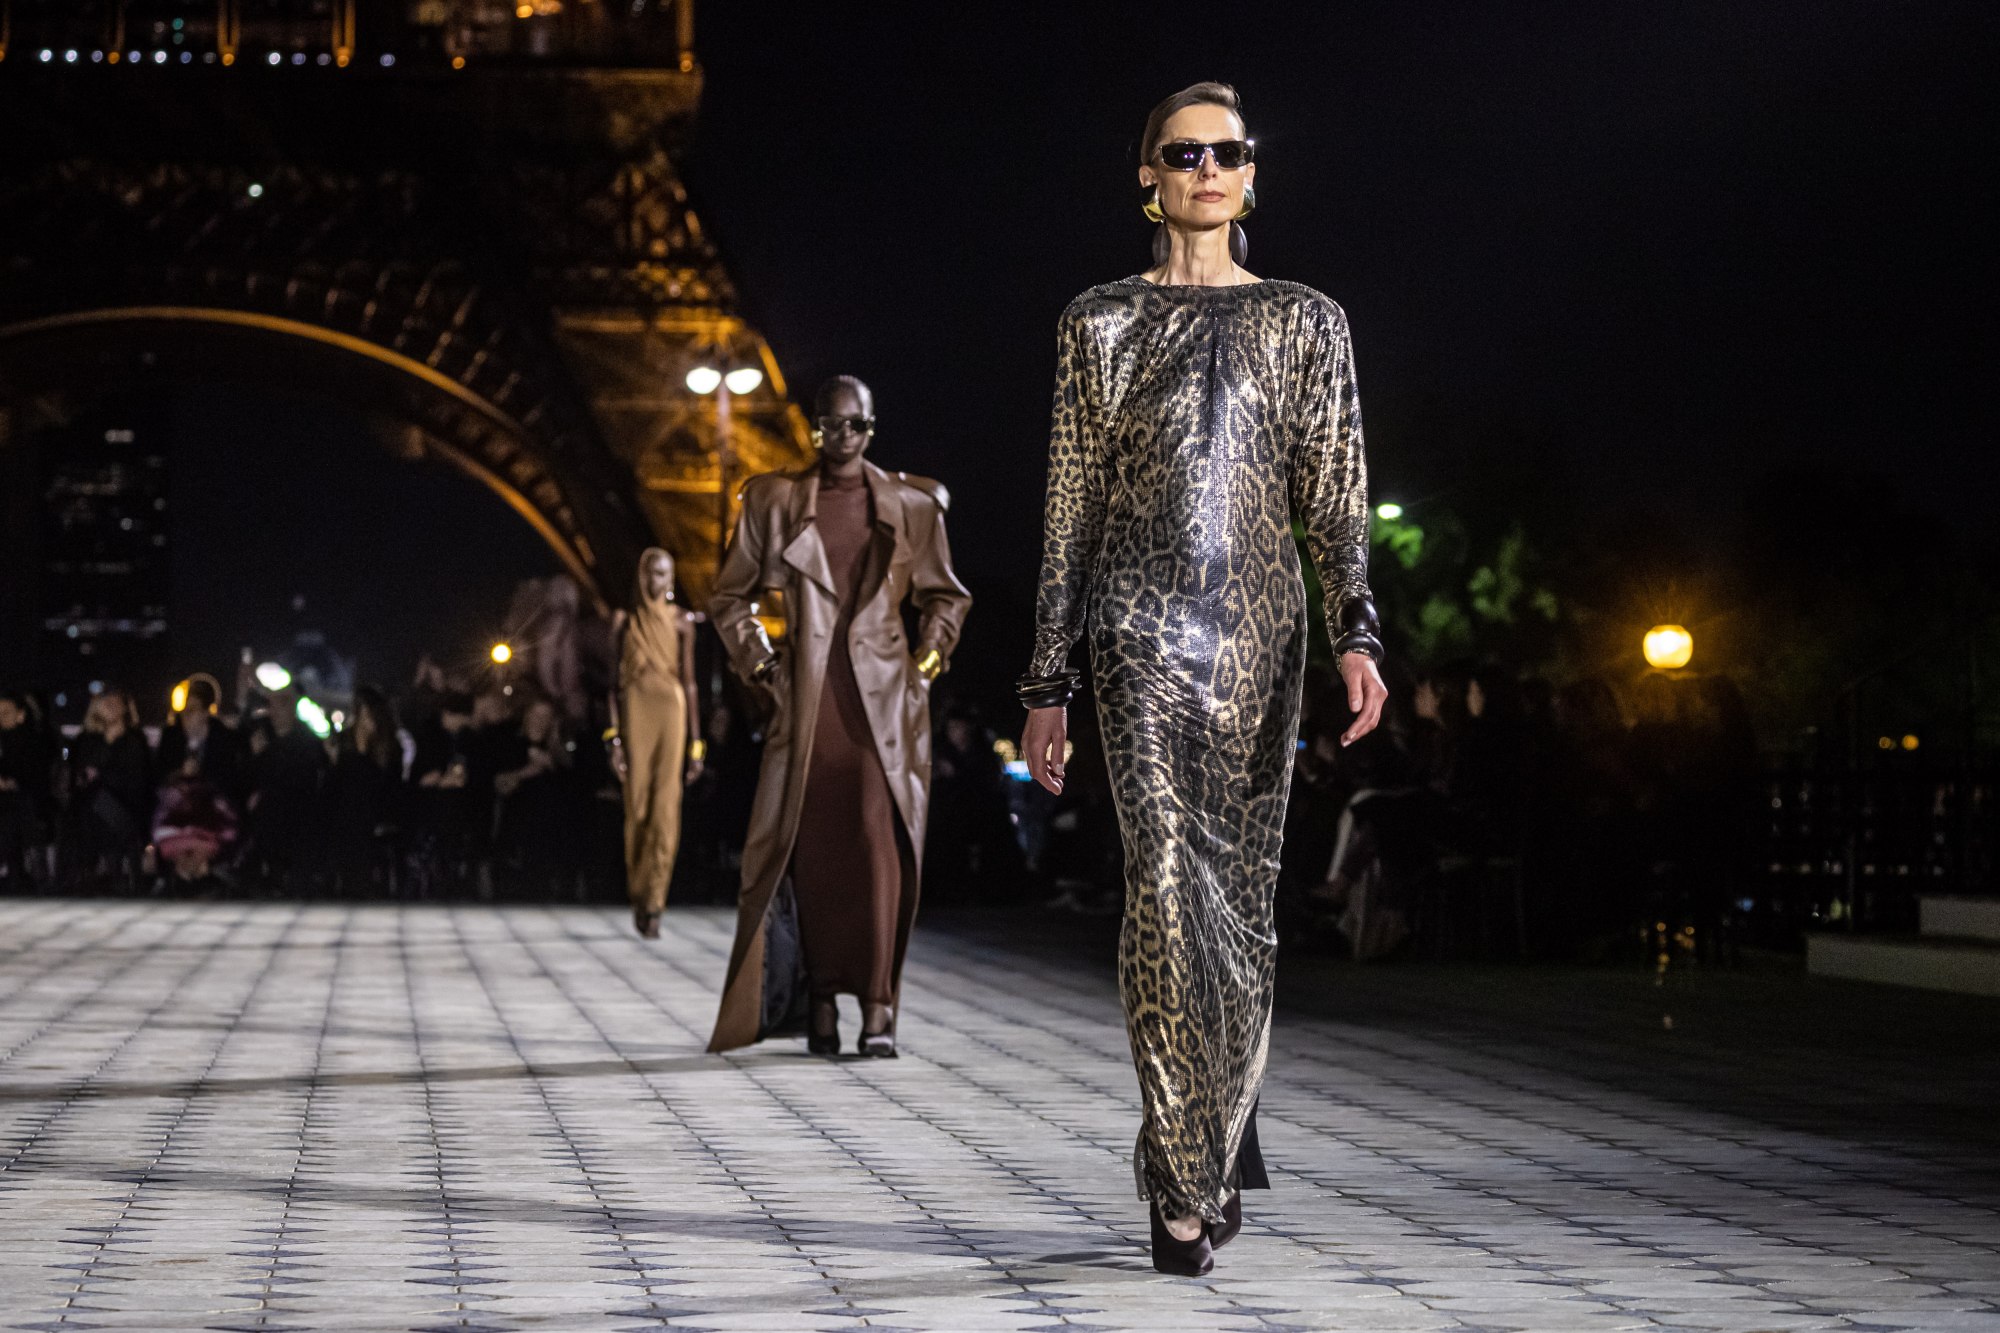 Saint Laurent Spring 2023 Ready-to-Wear Fashion Show